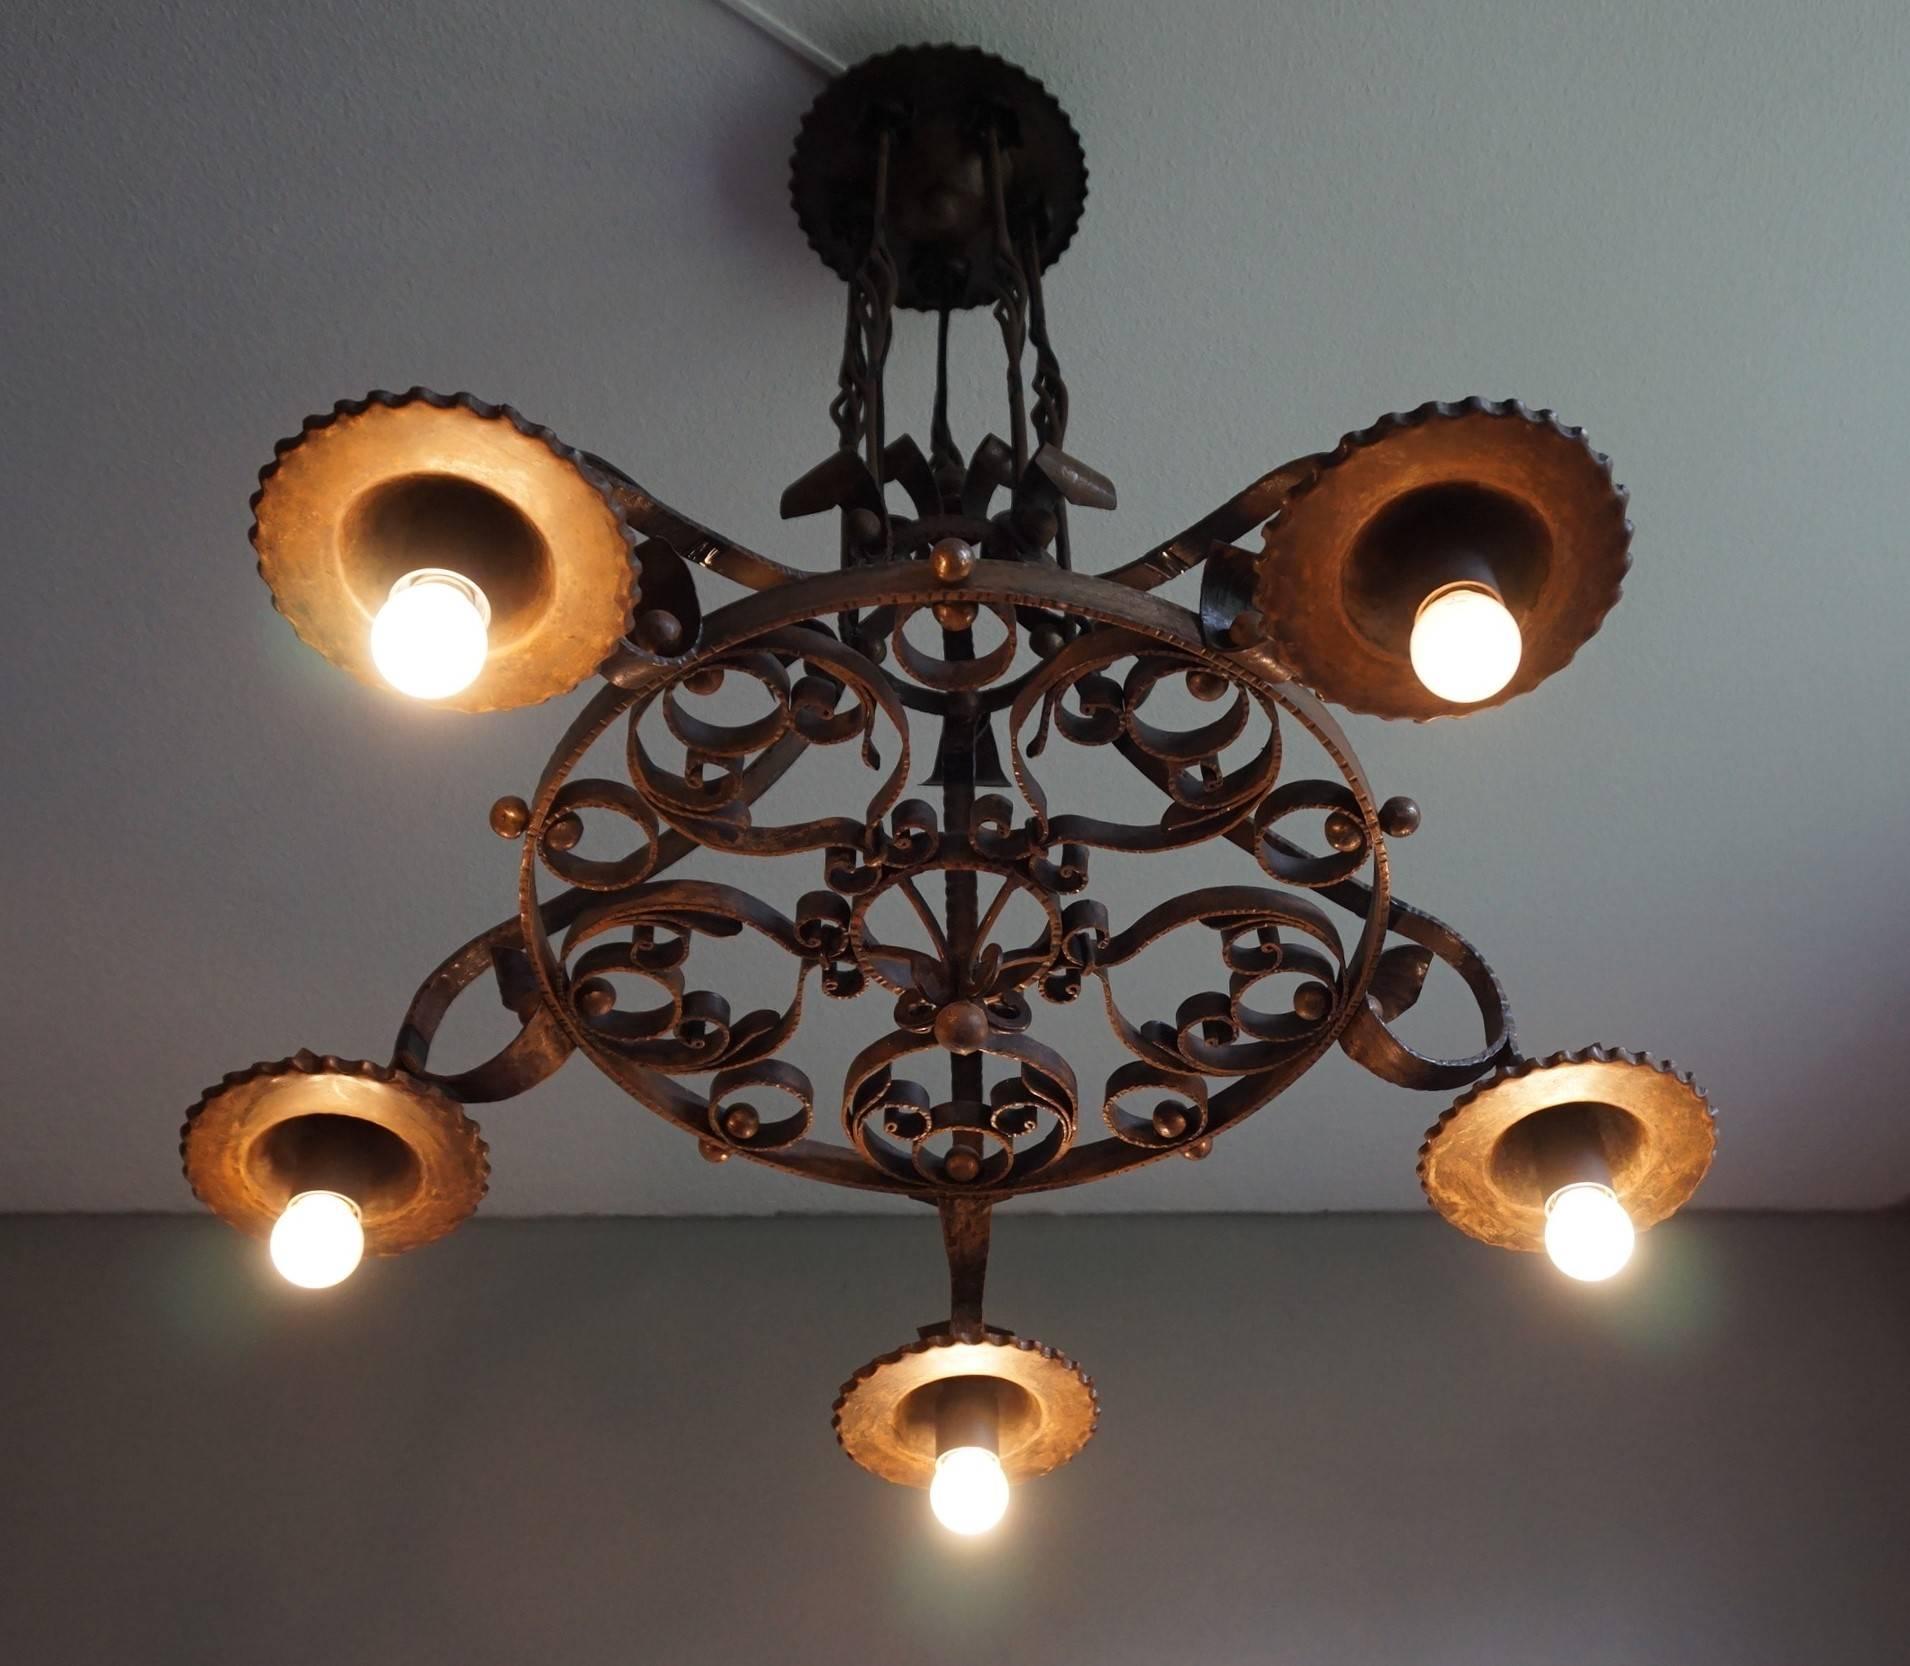 All hand-crafted, early 20th century Arts & Crafts pendant.

If you are looking for a rare and impressive Arts & Crafts pendant to light up a large entrance or to hang above your dining table then this forged in fire chandelier could be perfect